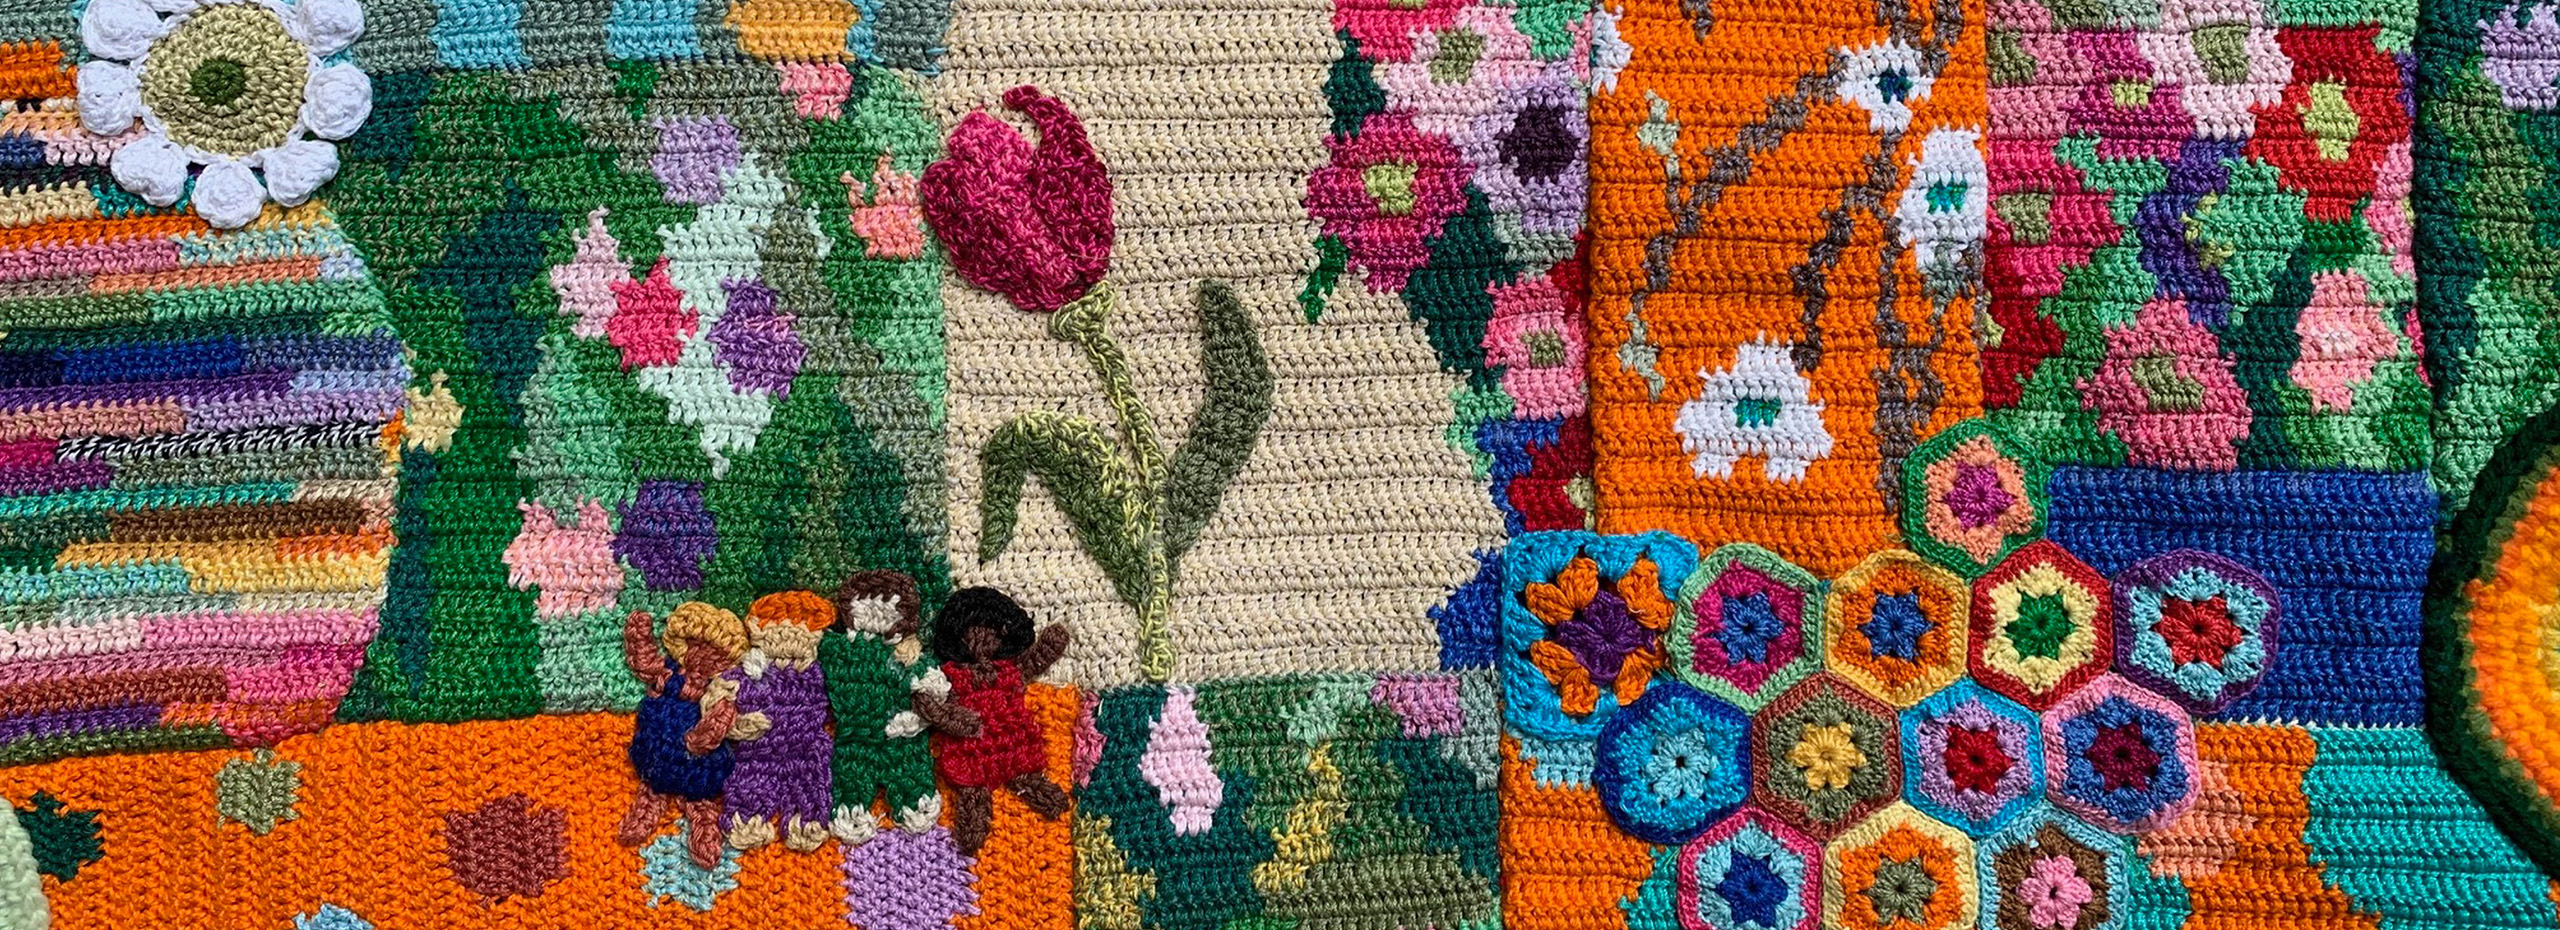 A colorful patchwork of crocheted flowers, people, and patterns